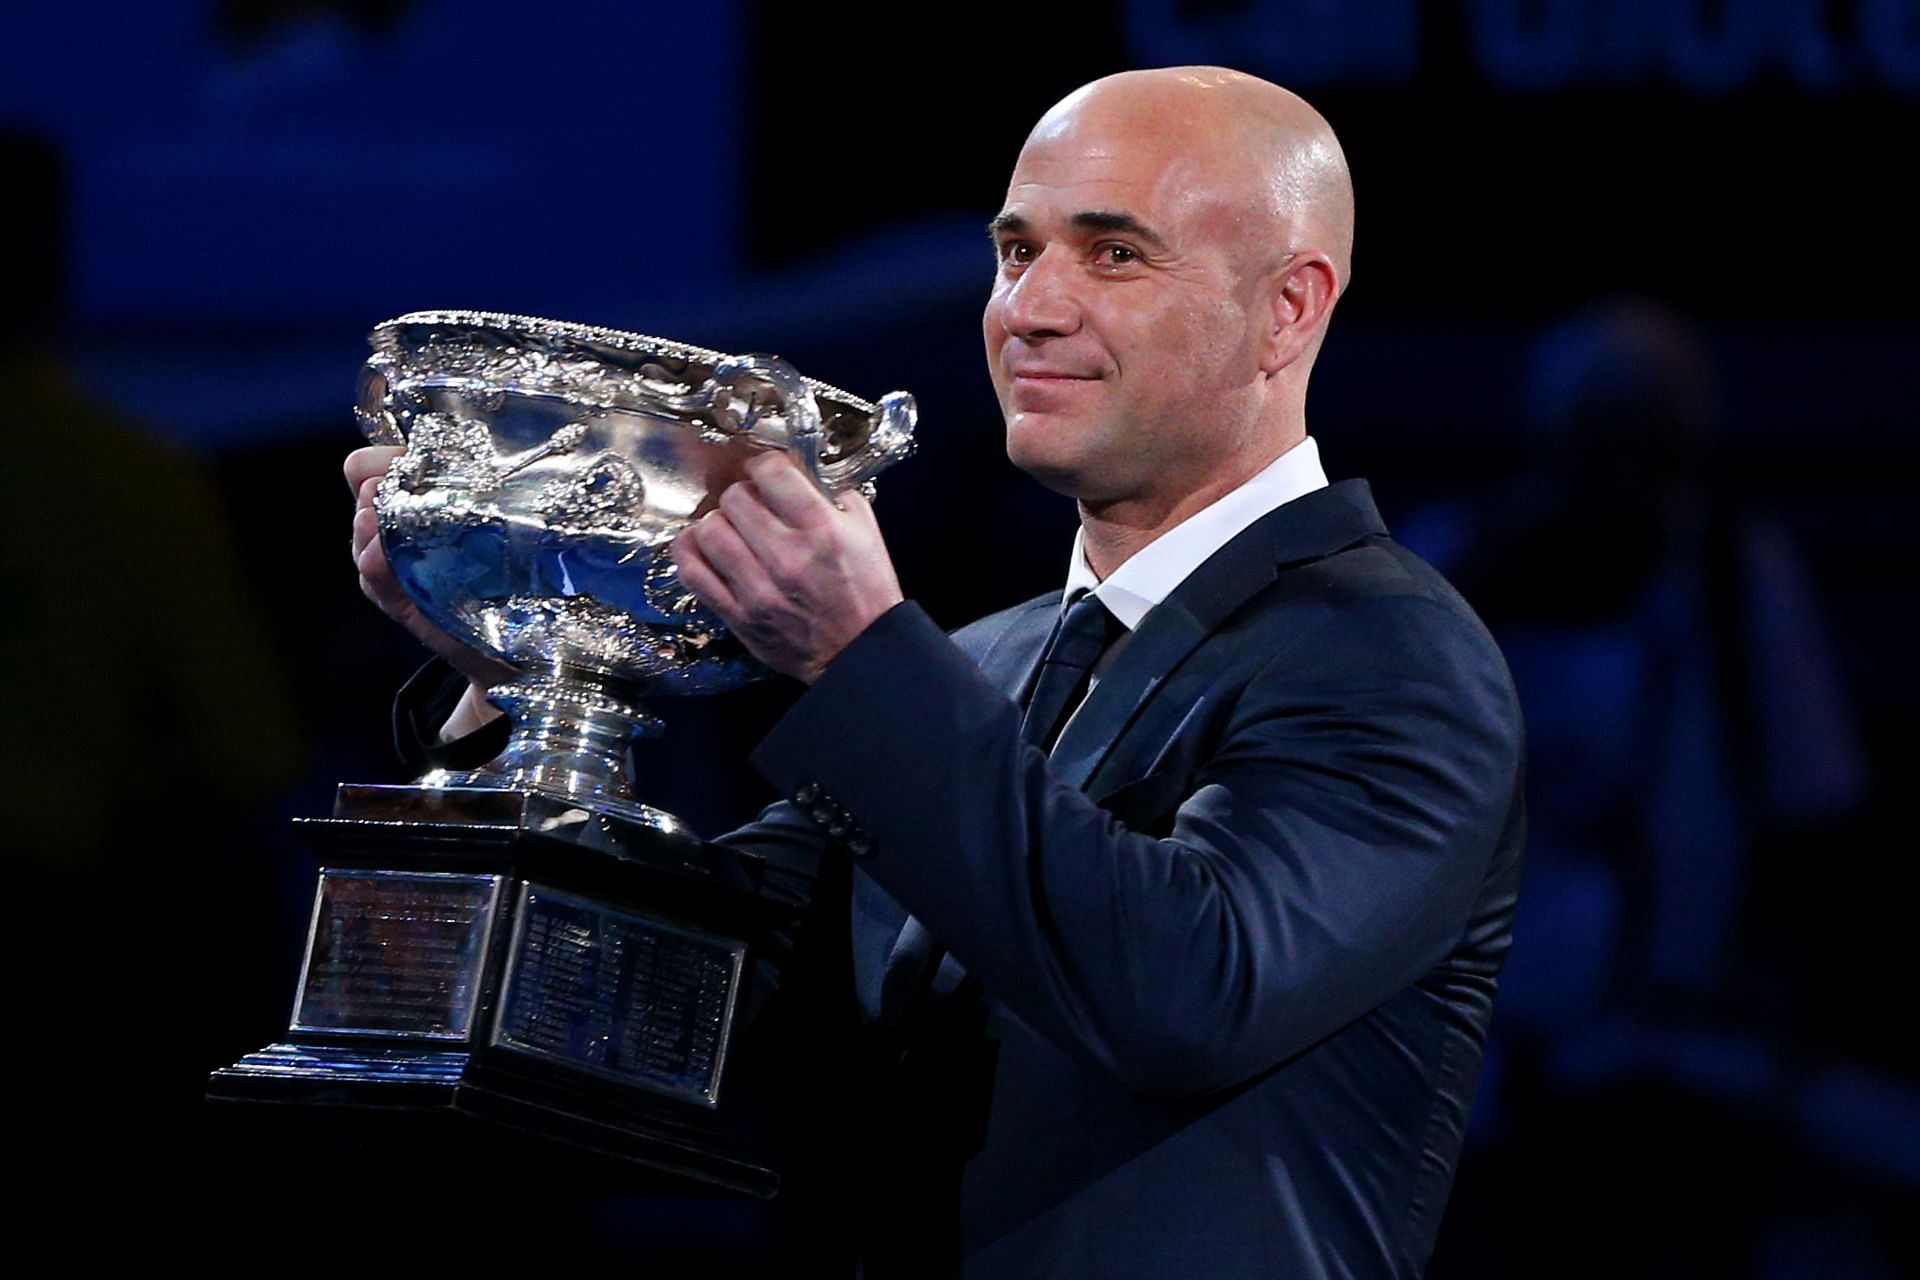 Andre Agassi at the 2013 Australian Open